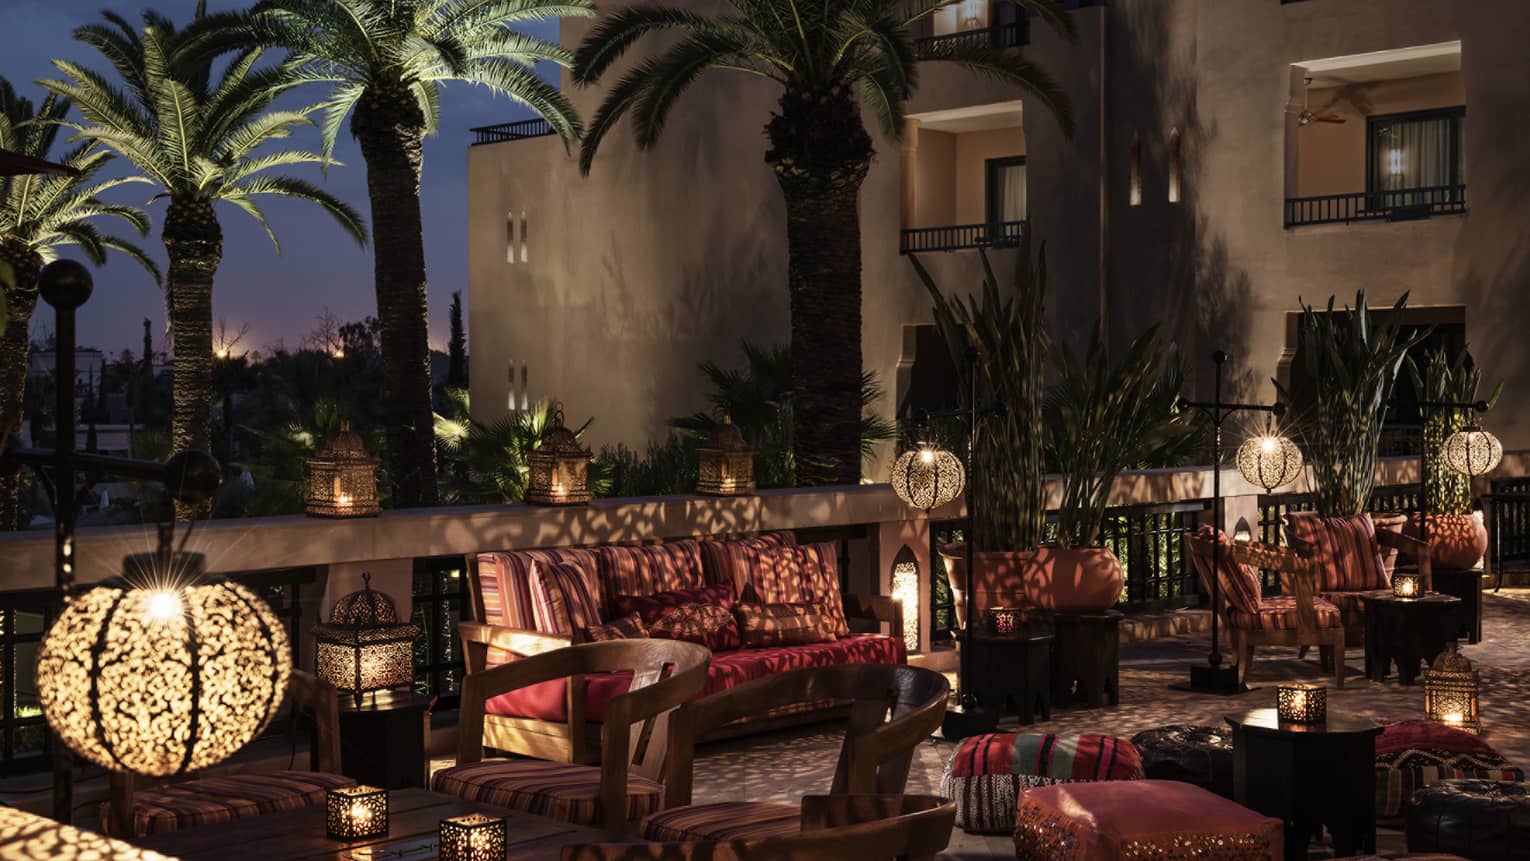 Inara Lounge dimly-lit patio seating areas with lights, shadows from Moroccan lamps